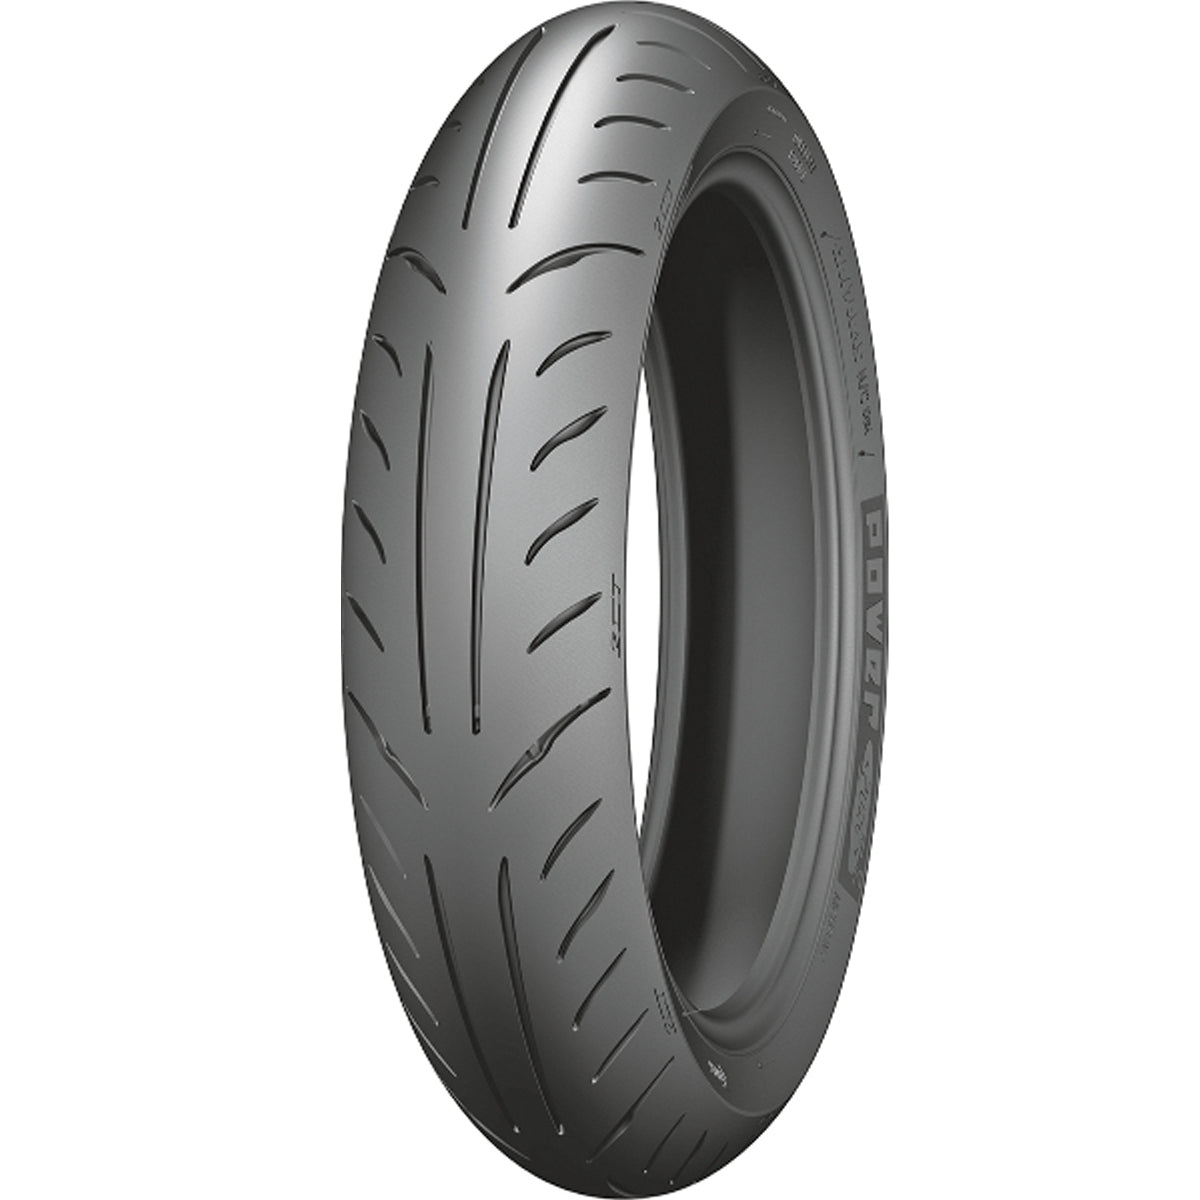 Michelin Power Pure SC 14" Front Cruiser Tires-0340